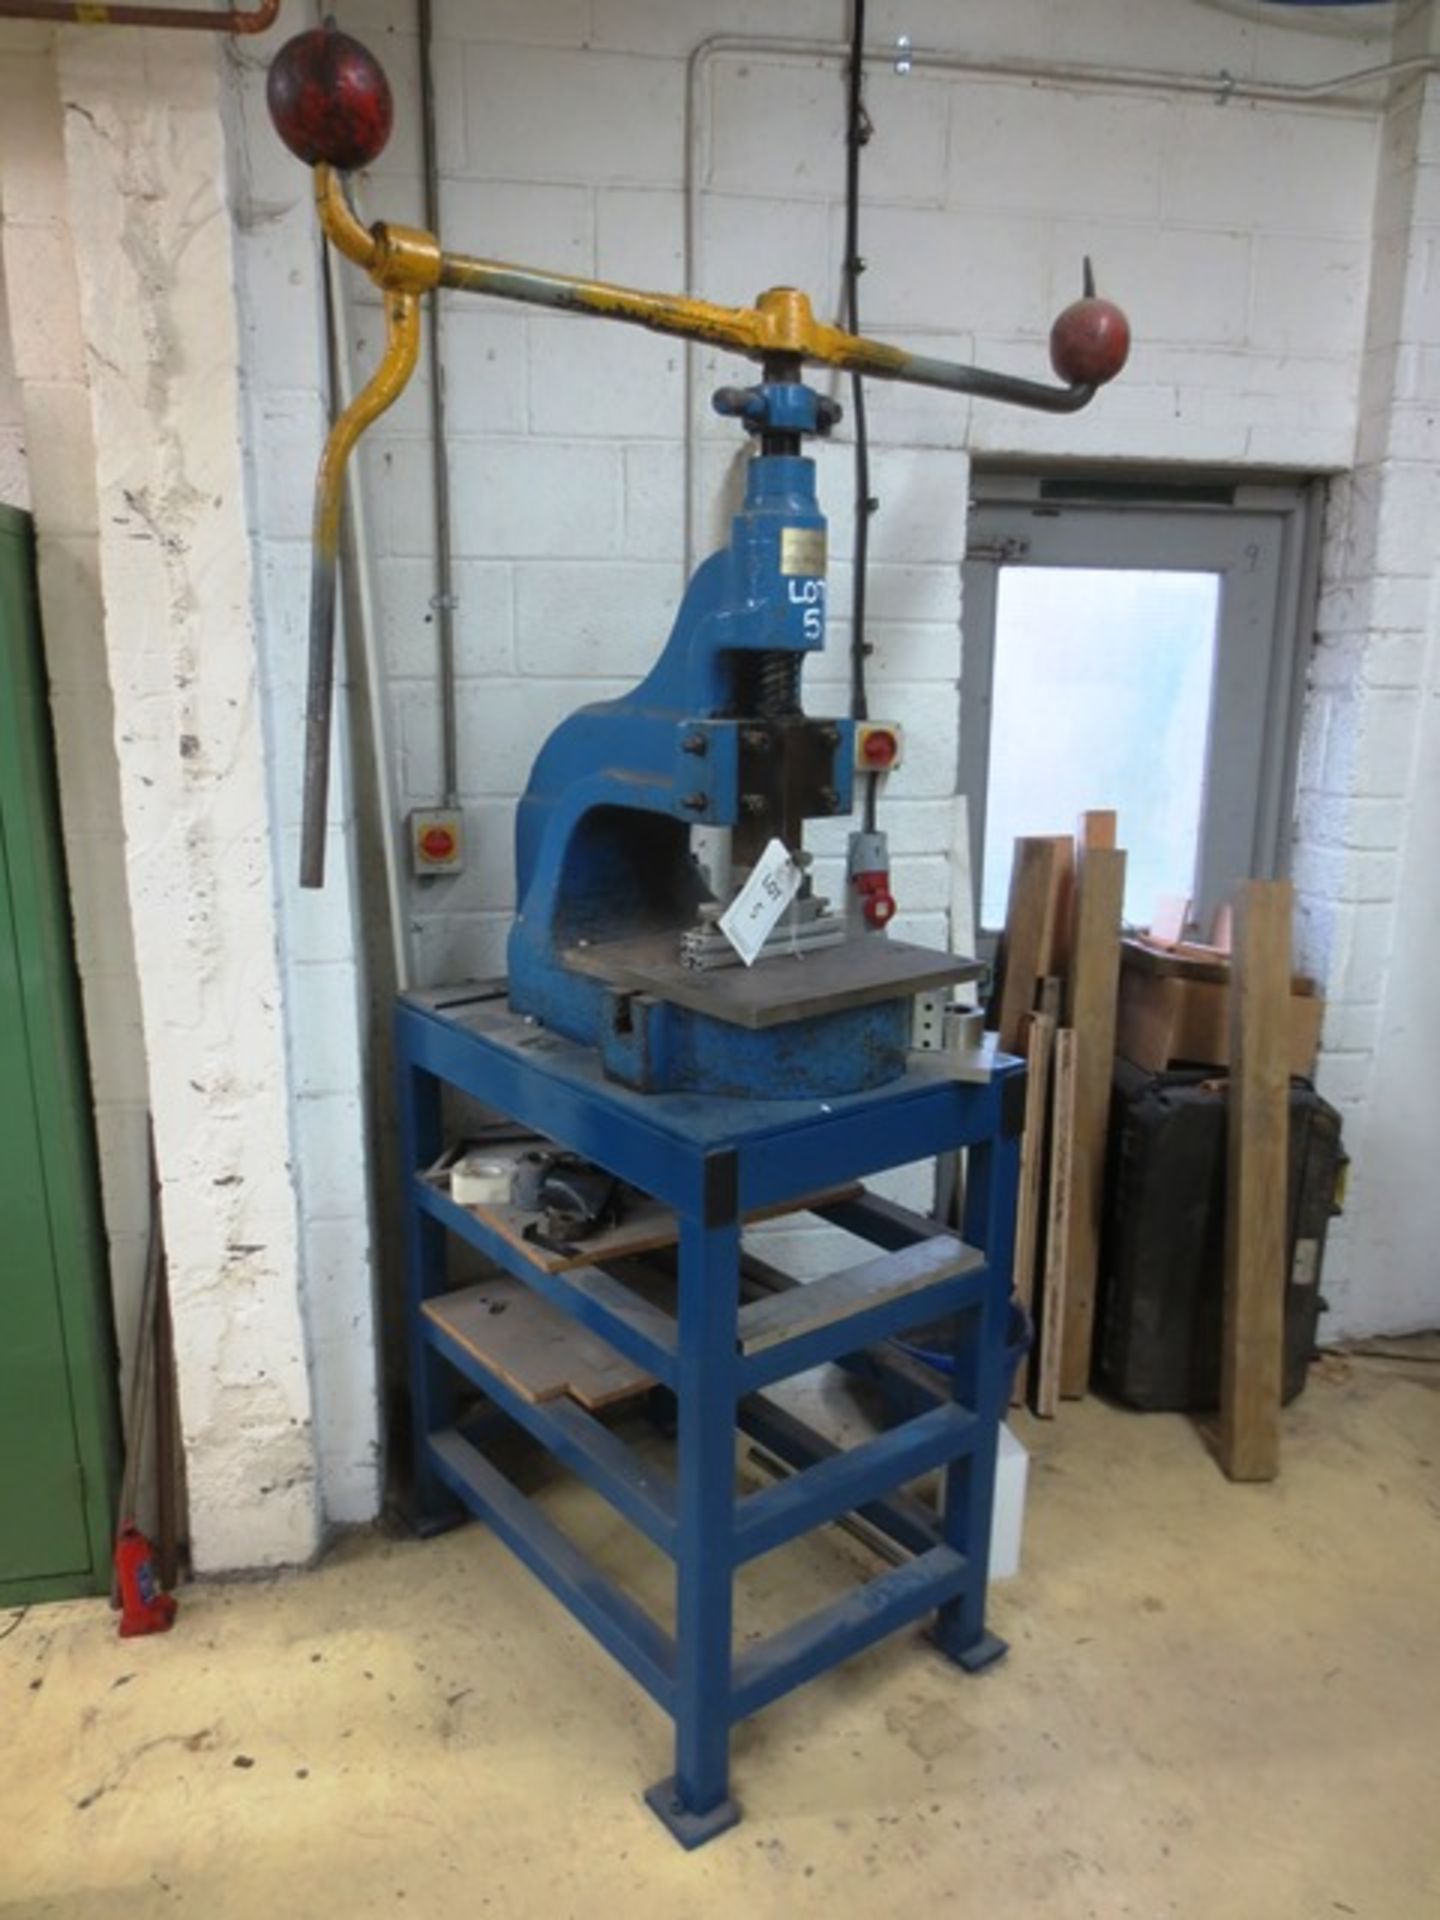 Sweeney & Blocksidge No 6A DB fly press, and steel framed stand (Please note: A work Method